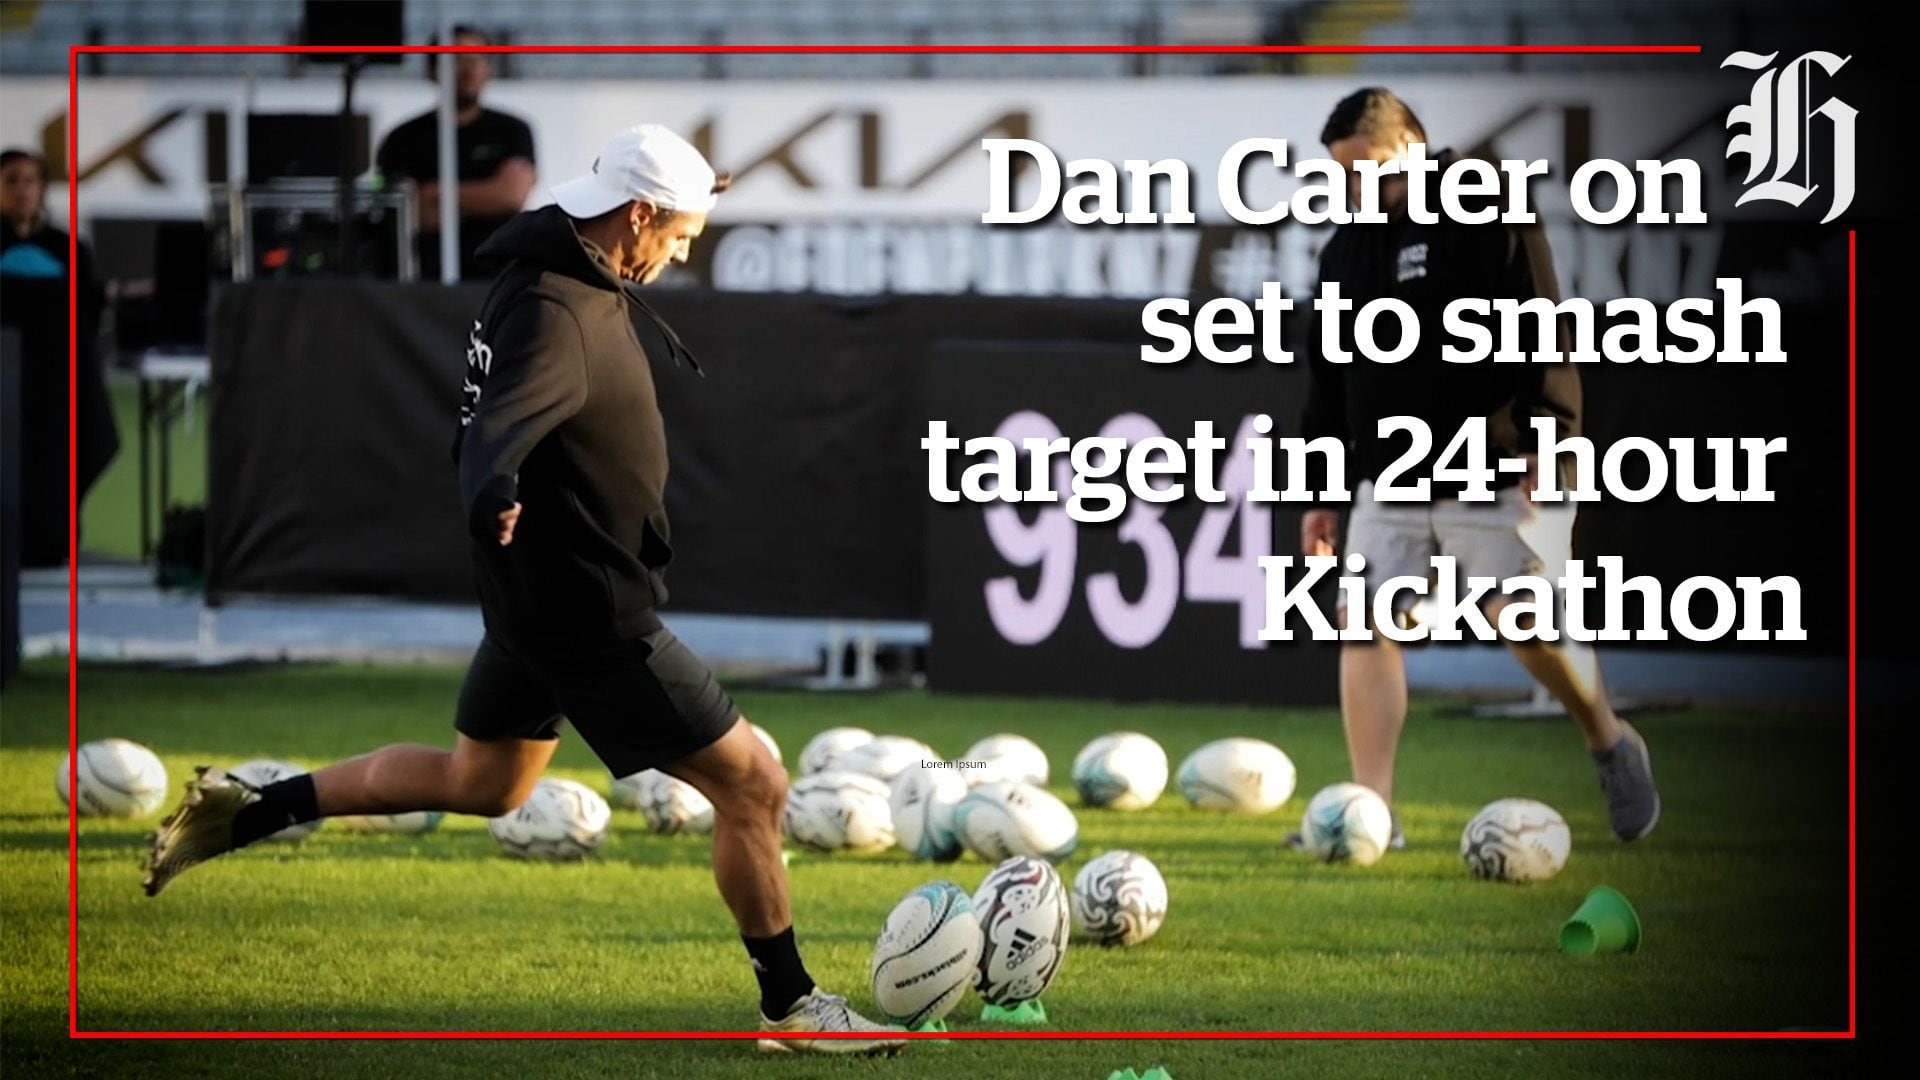 Dan Carter: 1598. A career celebration of the iconic All Black who